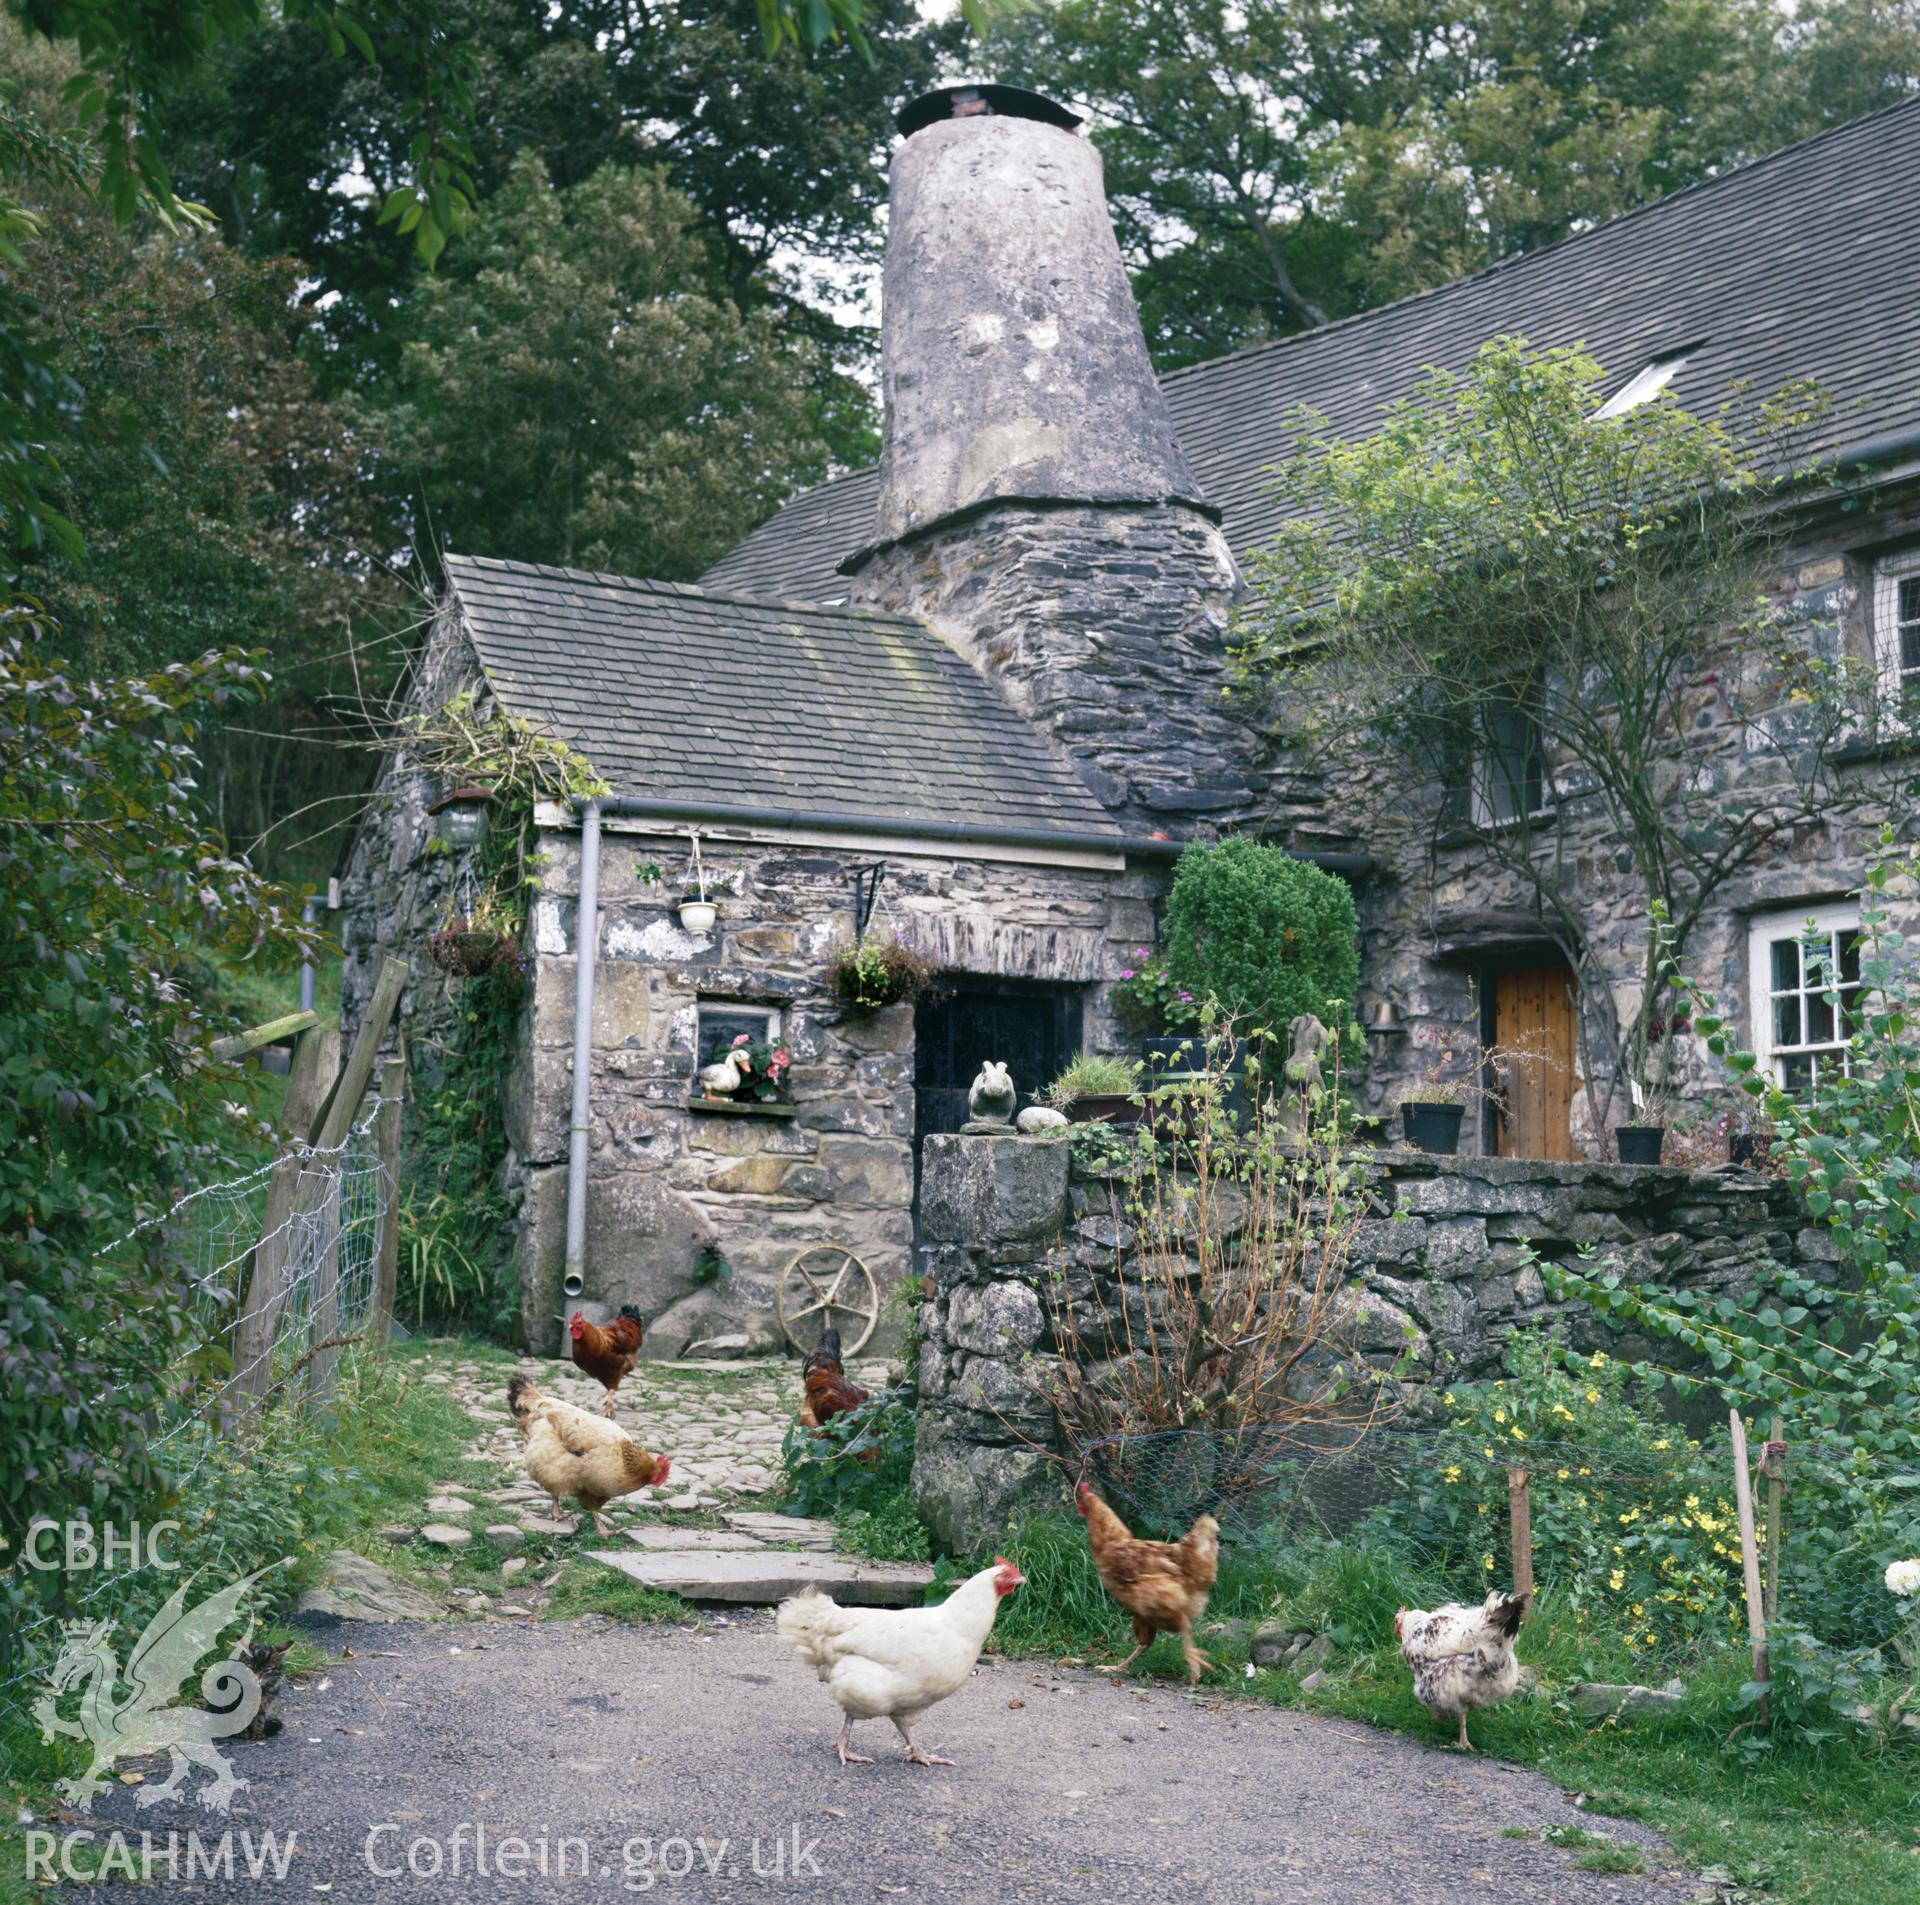 Colour transparency showing a view of Garn Farmhouse, Llanychaer, produced by Fleur James, c.1986.